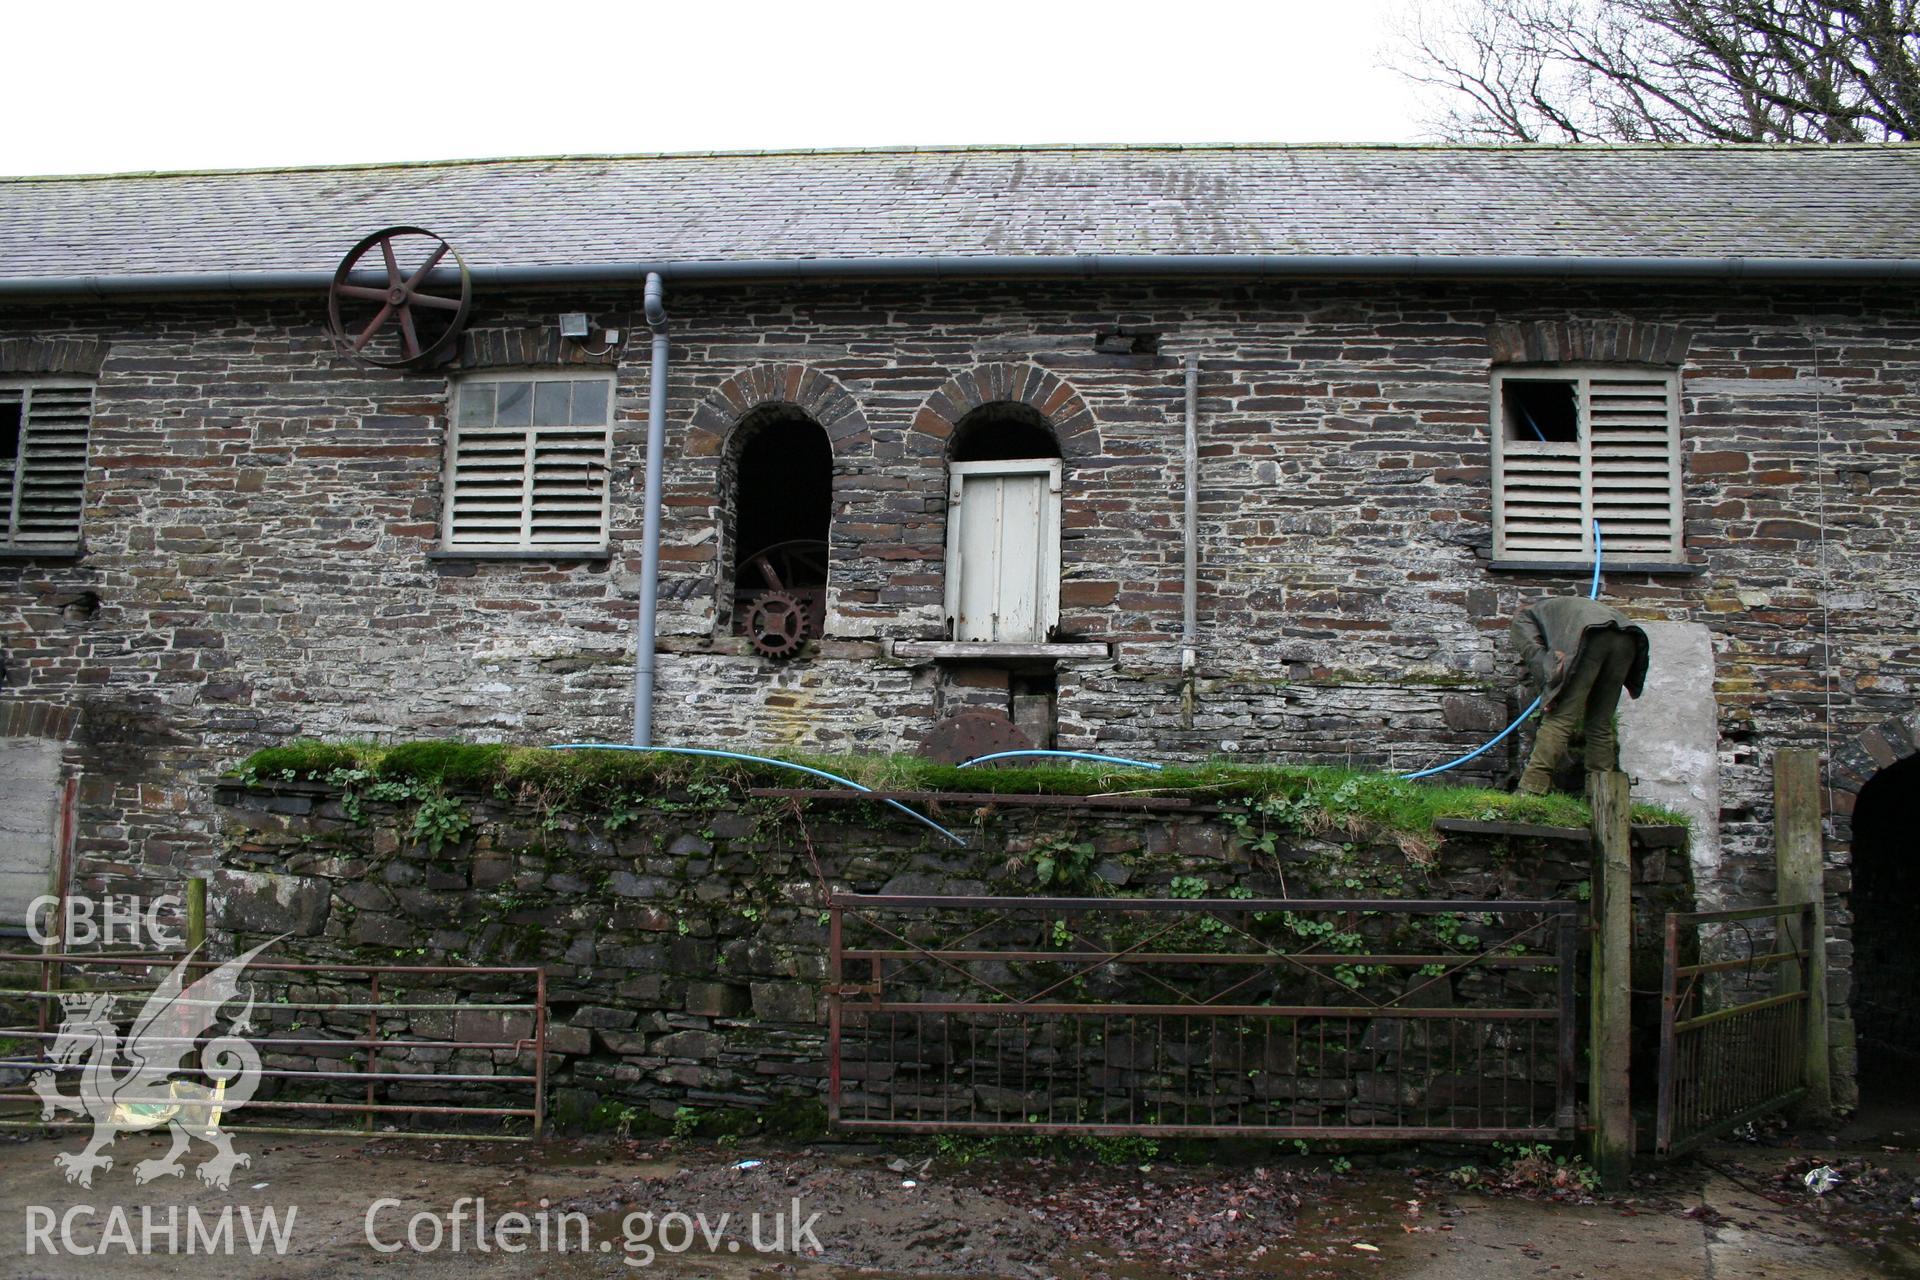 Exterior view of water wheel pit outside threshing house. Photographic survey of the exterior of the farm buildings at Tan-y-Graig Farm, Llanfarian, Aberystwyth. Conducted by Geoff Ward and John Wiles, 11th December 2006.